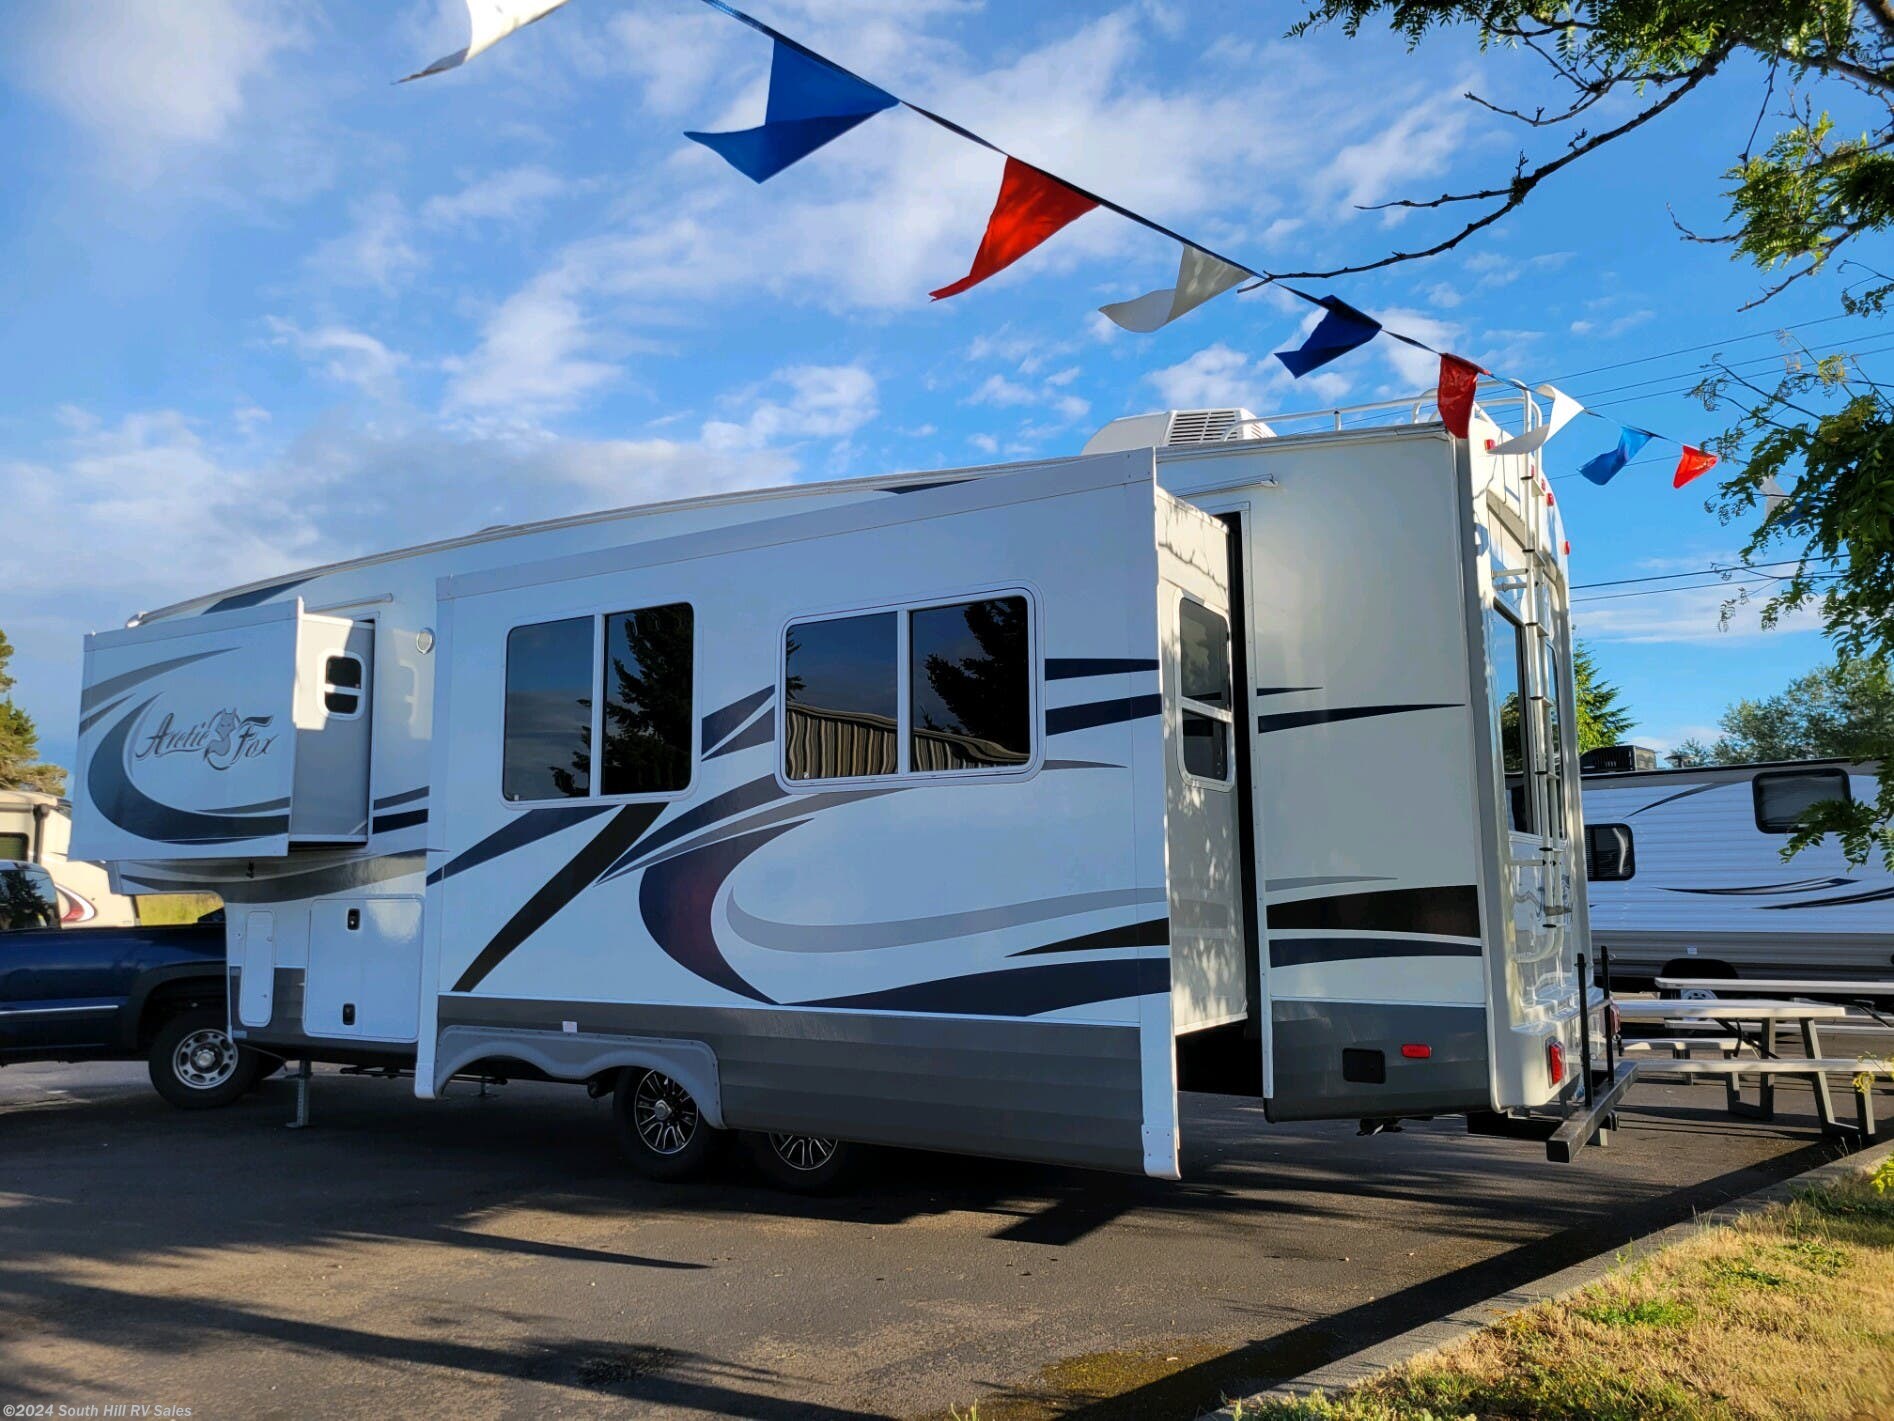 2016 Northwood Arctic Fox Silver Fox 29-5T RV for Sale in Yelm, WA Arctic Fox 29 5t For Sale